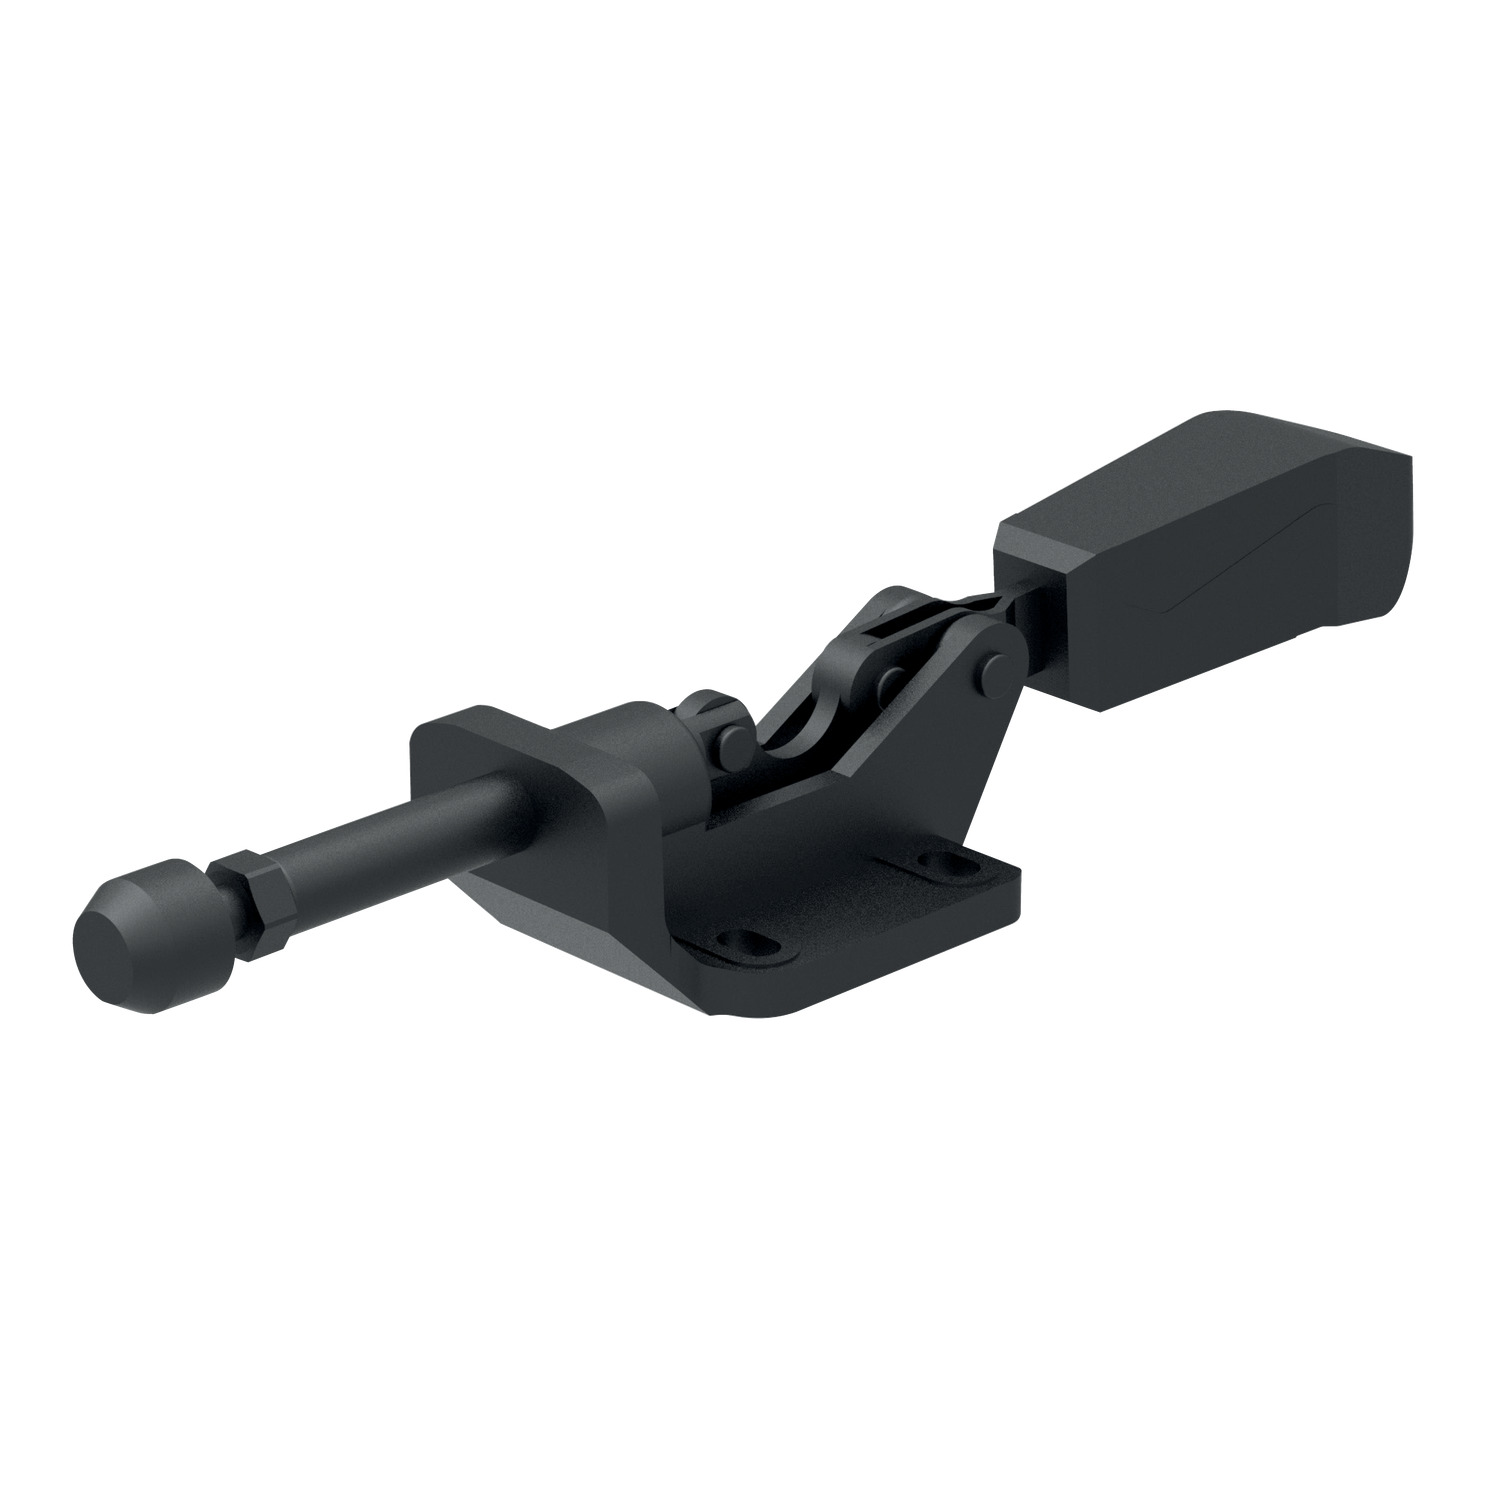 Product 42050.2, Push-Pull Type Toggle Clamps - Black for optical measuring equipment / 